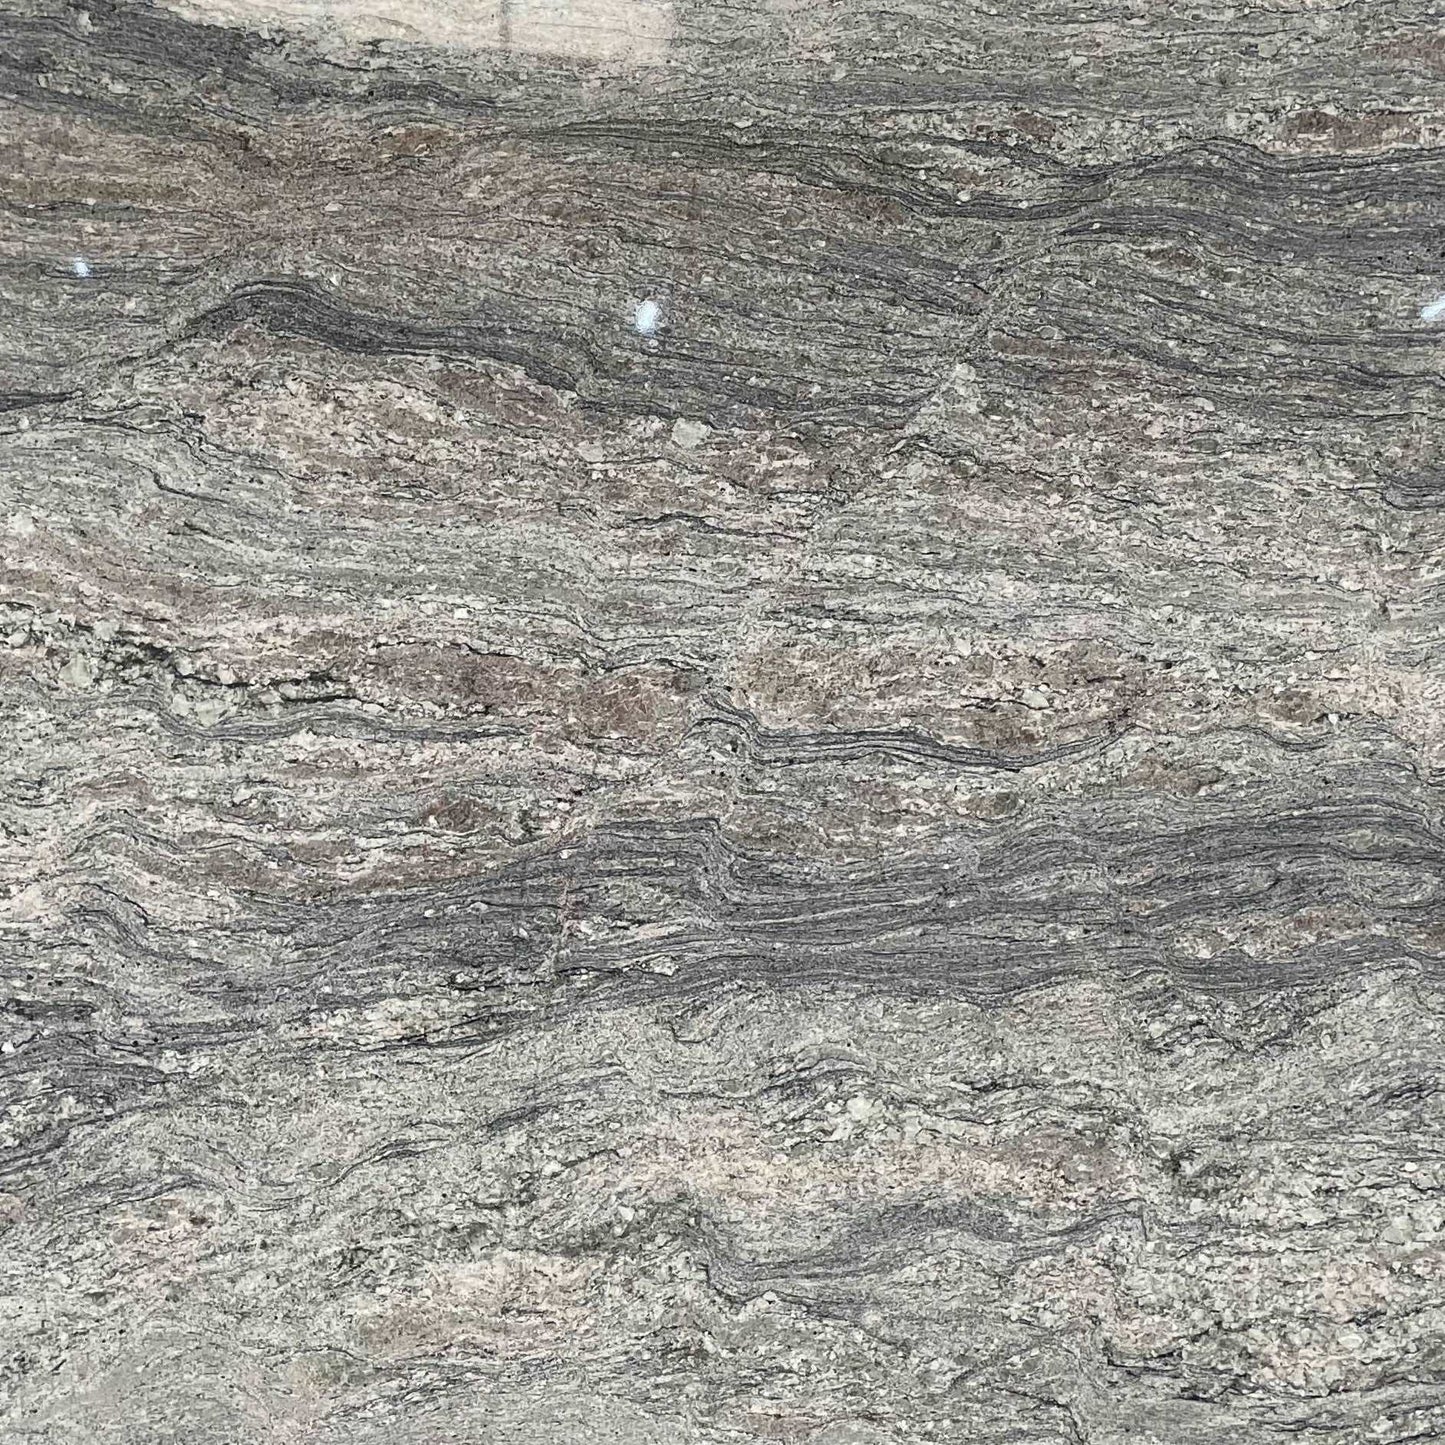 Branco Piracema patterned granite slab with waving colours of blue, grey and lighter colours.